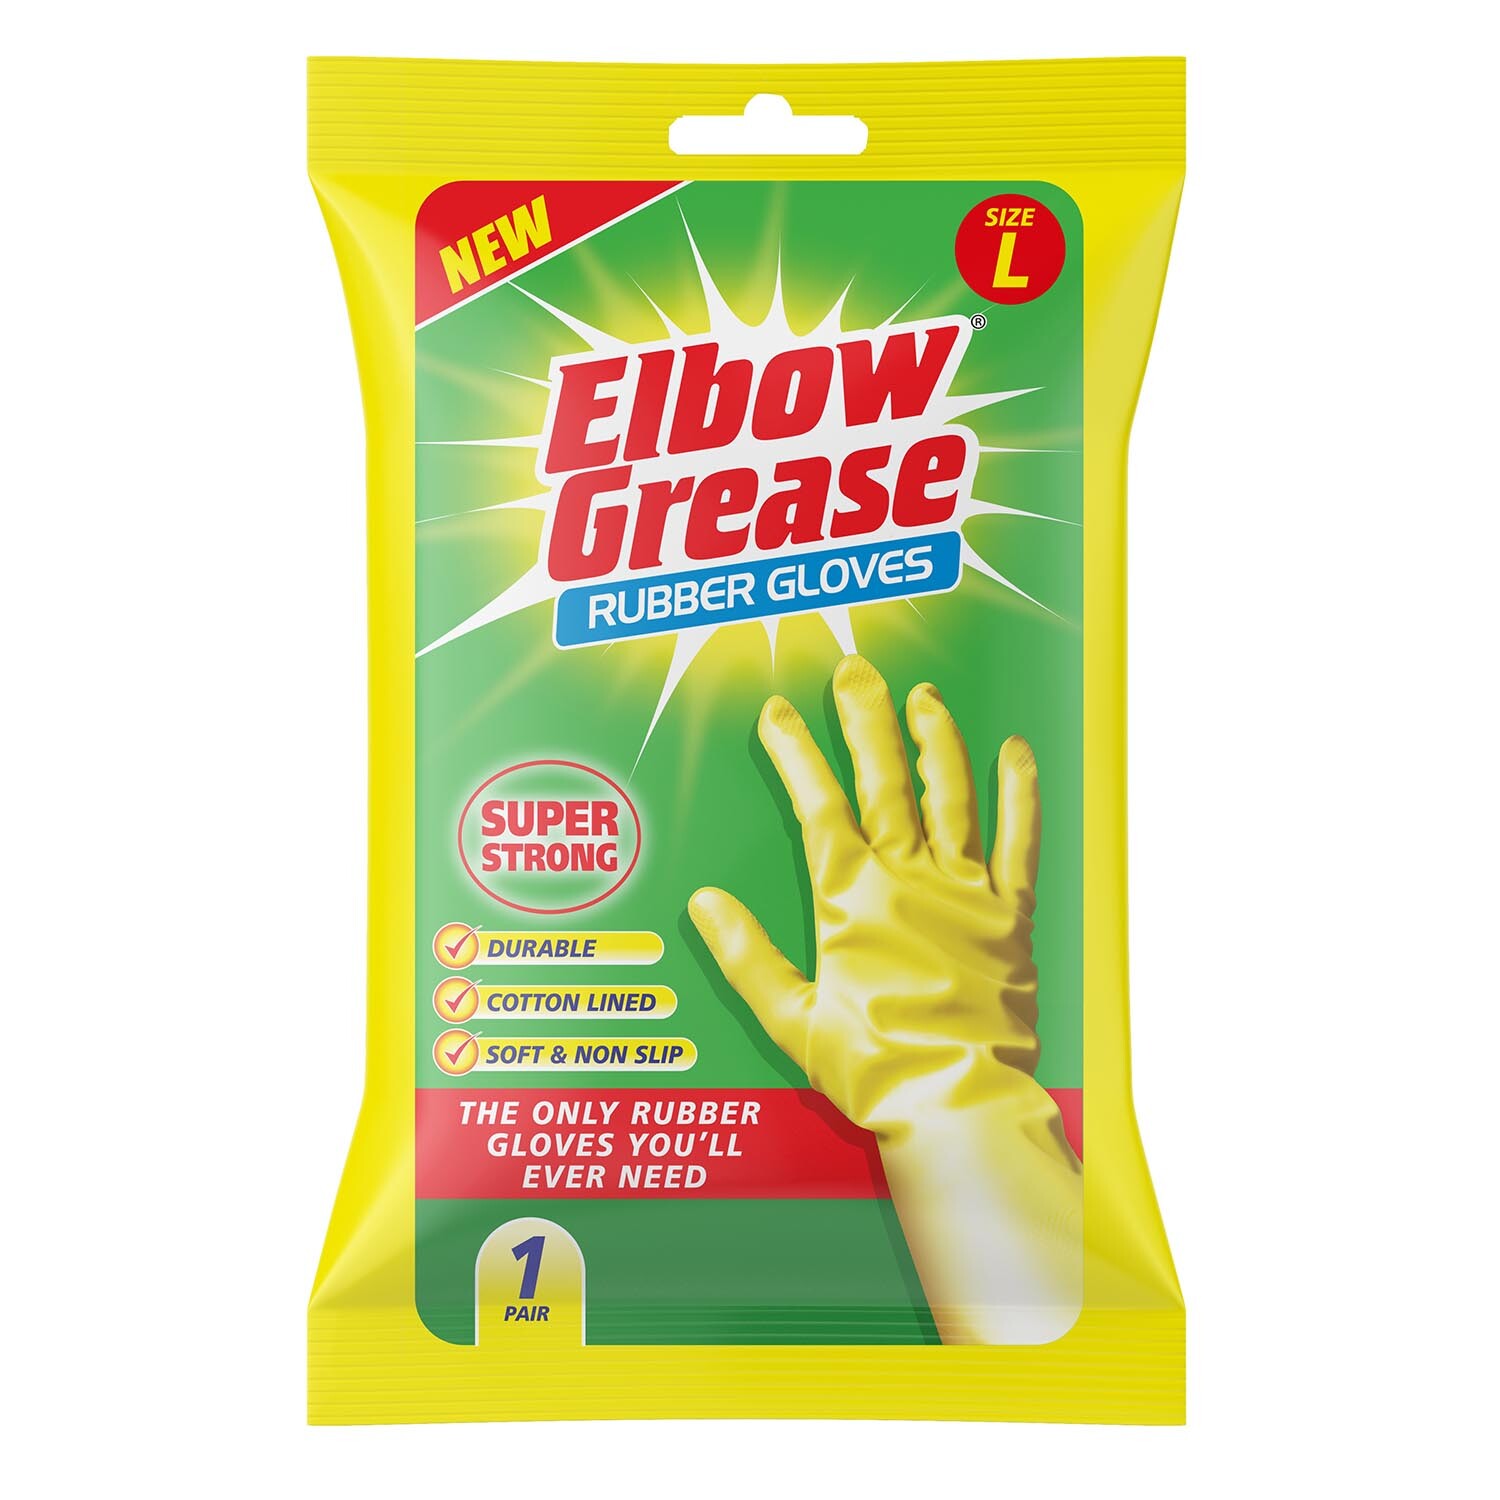 Elbow Grease Super Strong Rubber Gloves - L Image